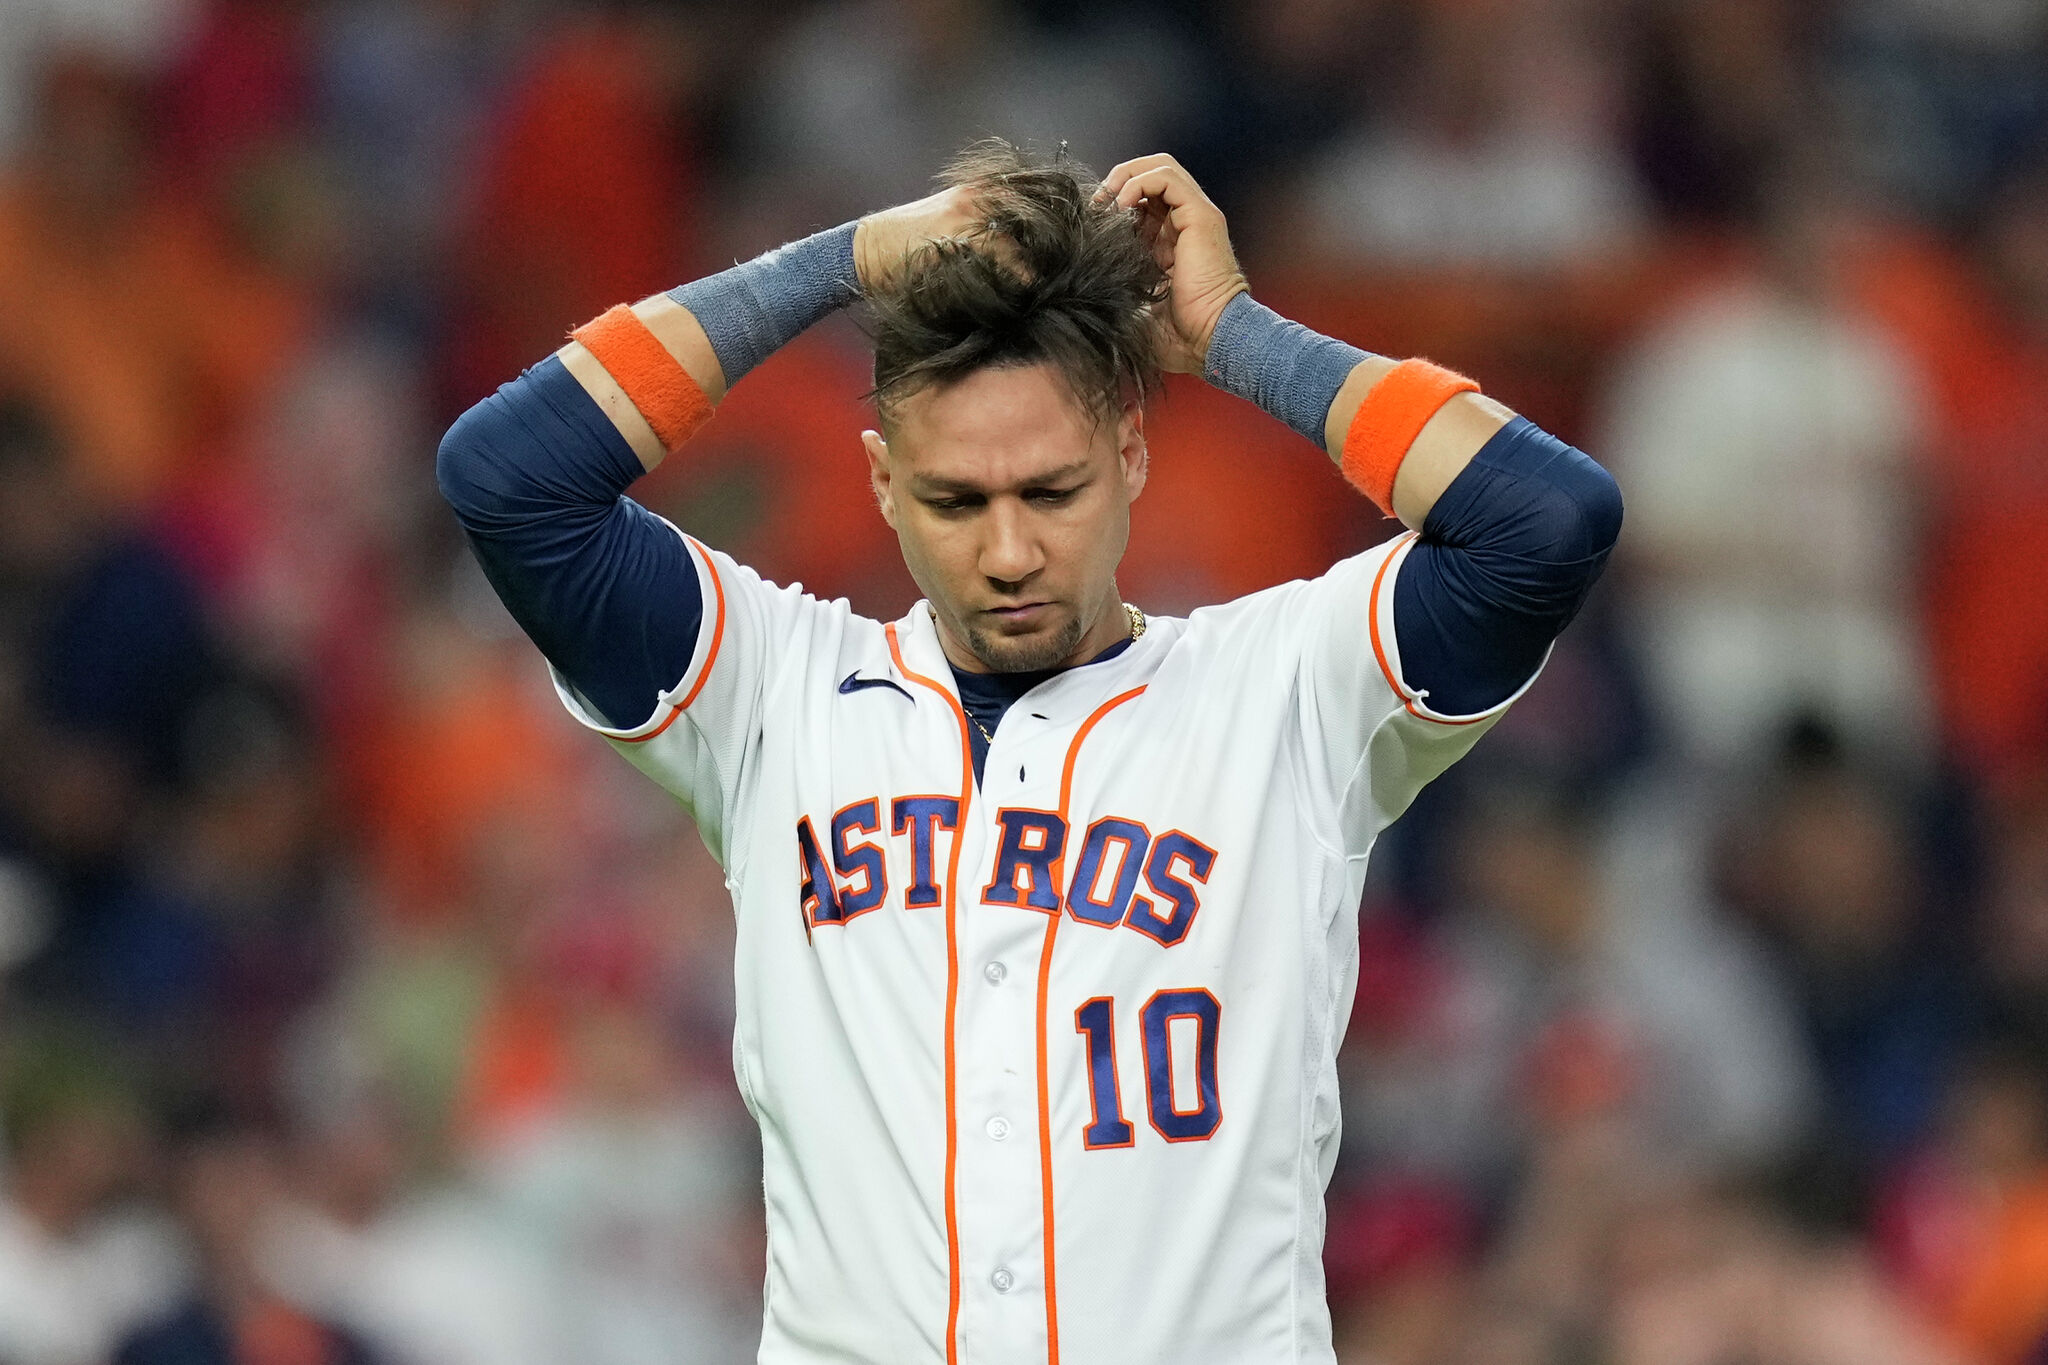 Houston Astros: A wasted chance in Game 1 of World Series